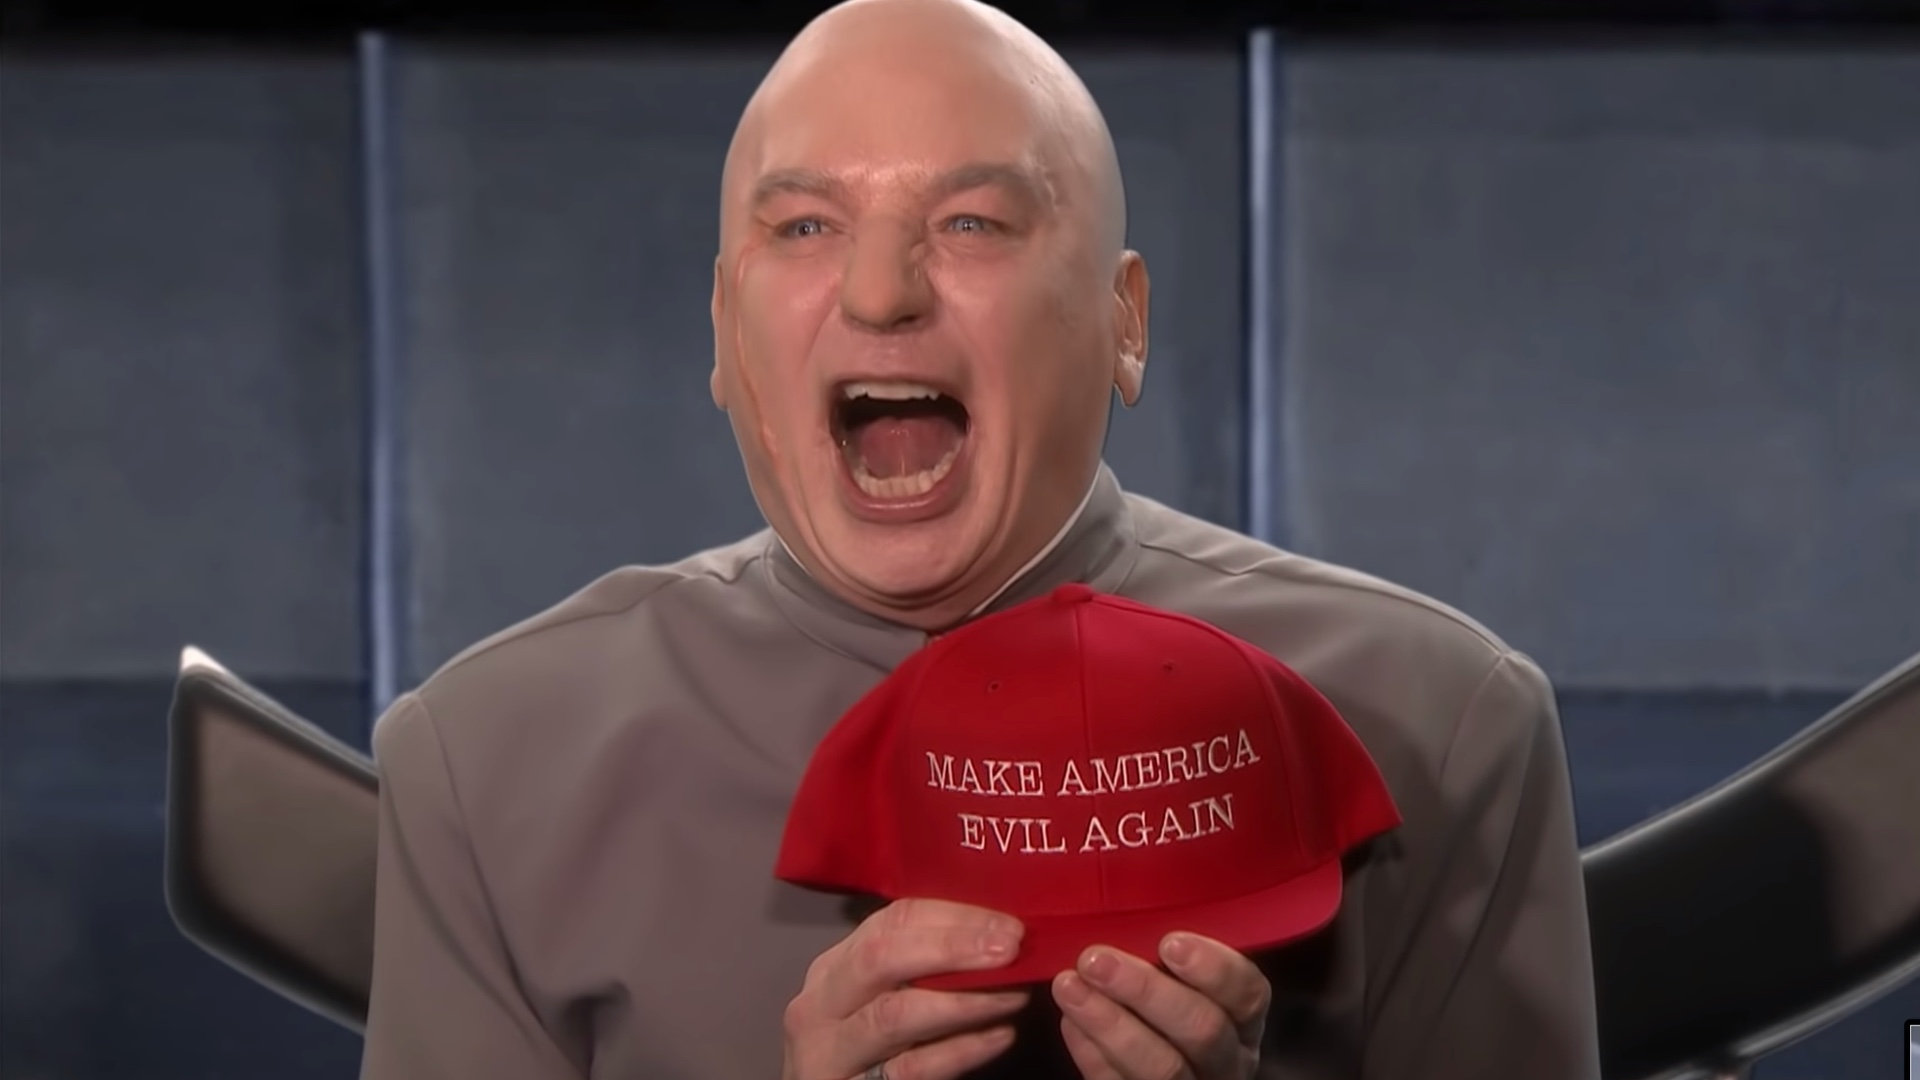 Dr. Evil is Back and Running For Congress and He Wants to Make America Evil Again.